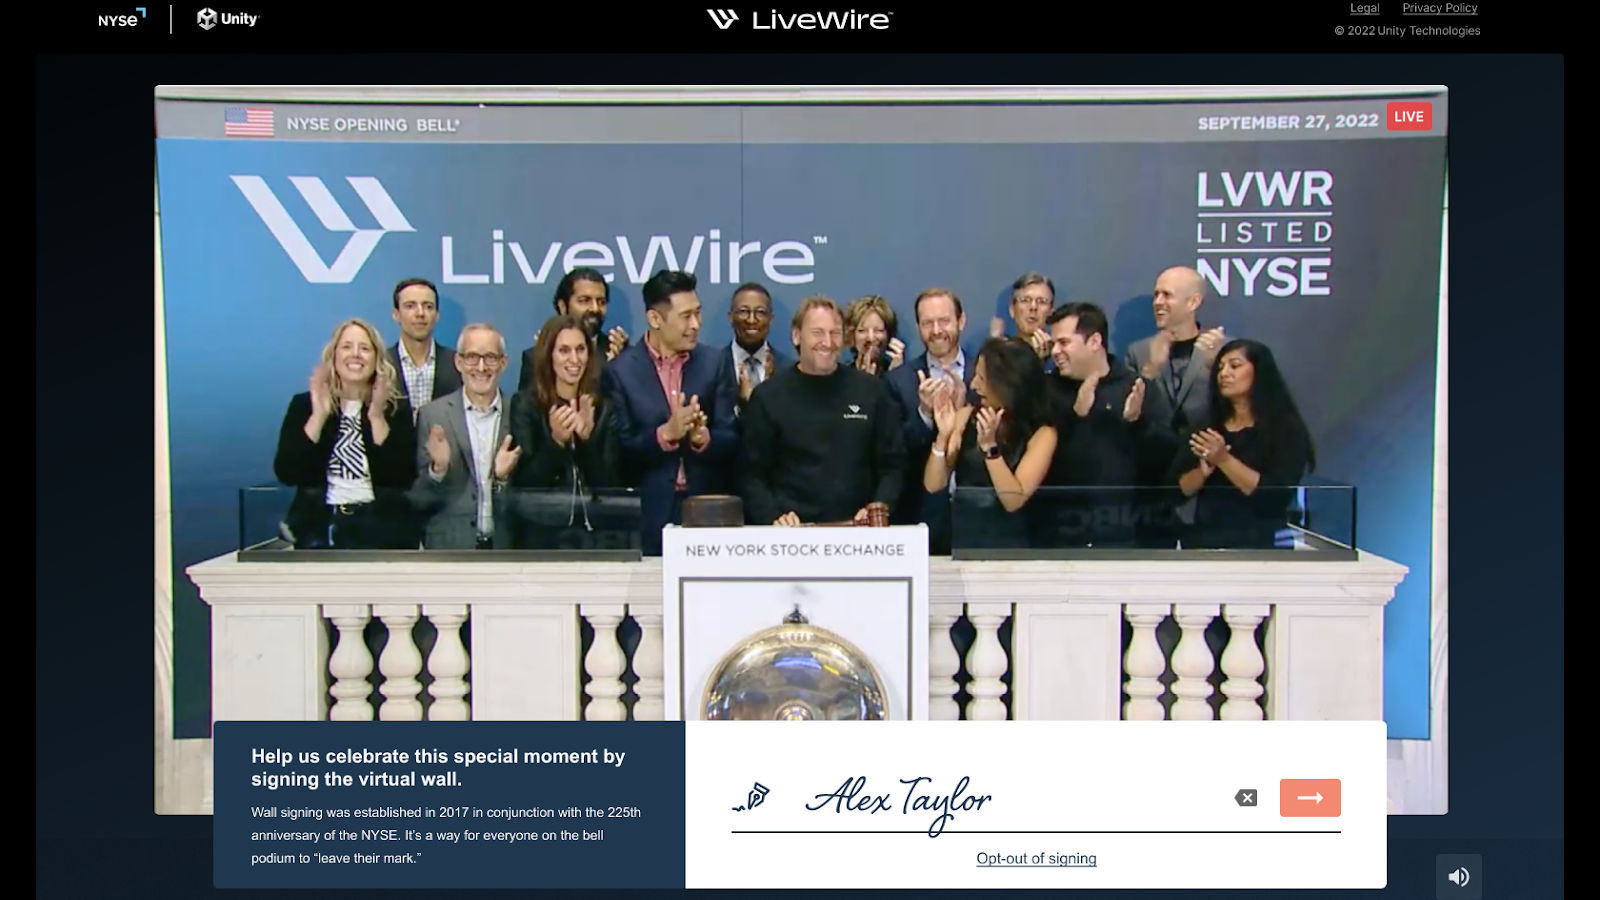 LiveWire's in-browser experience for its NYSE celebration